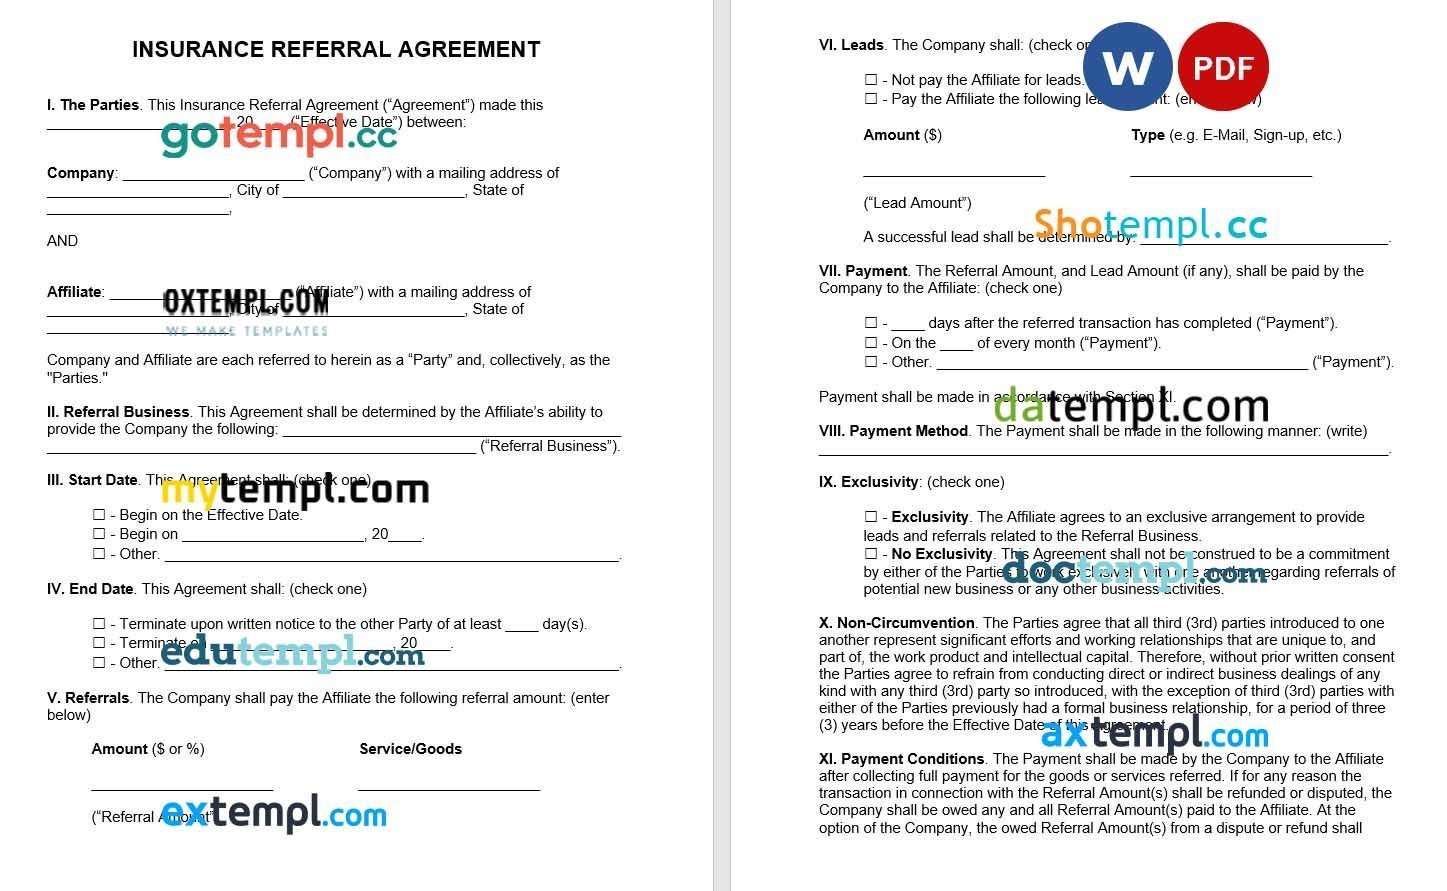 Insurance Referral Agreement word example, fully editable